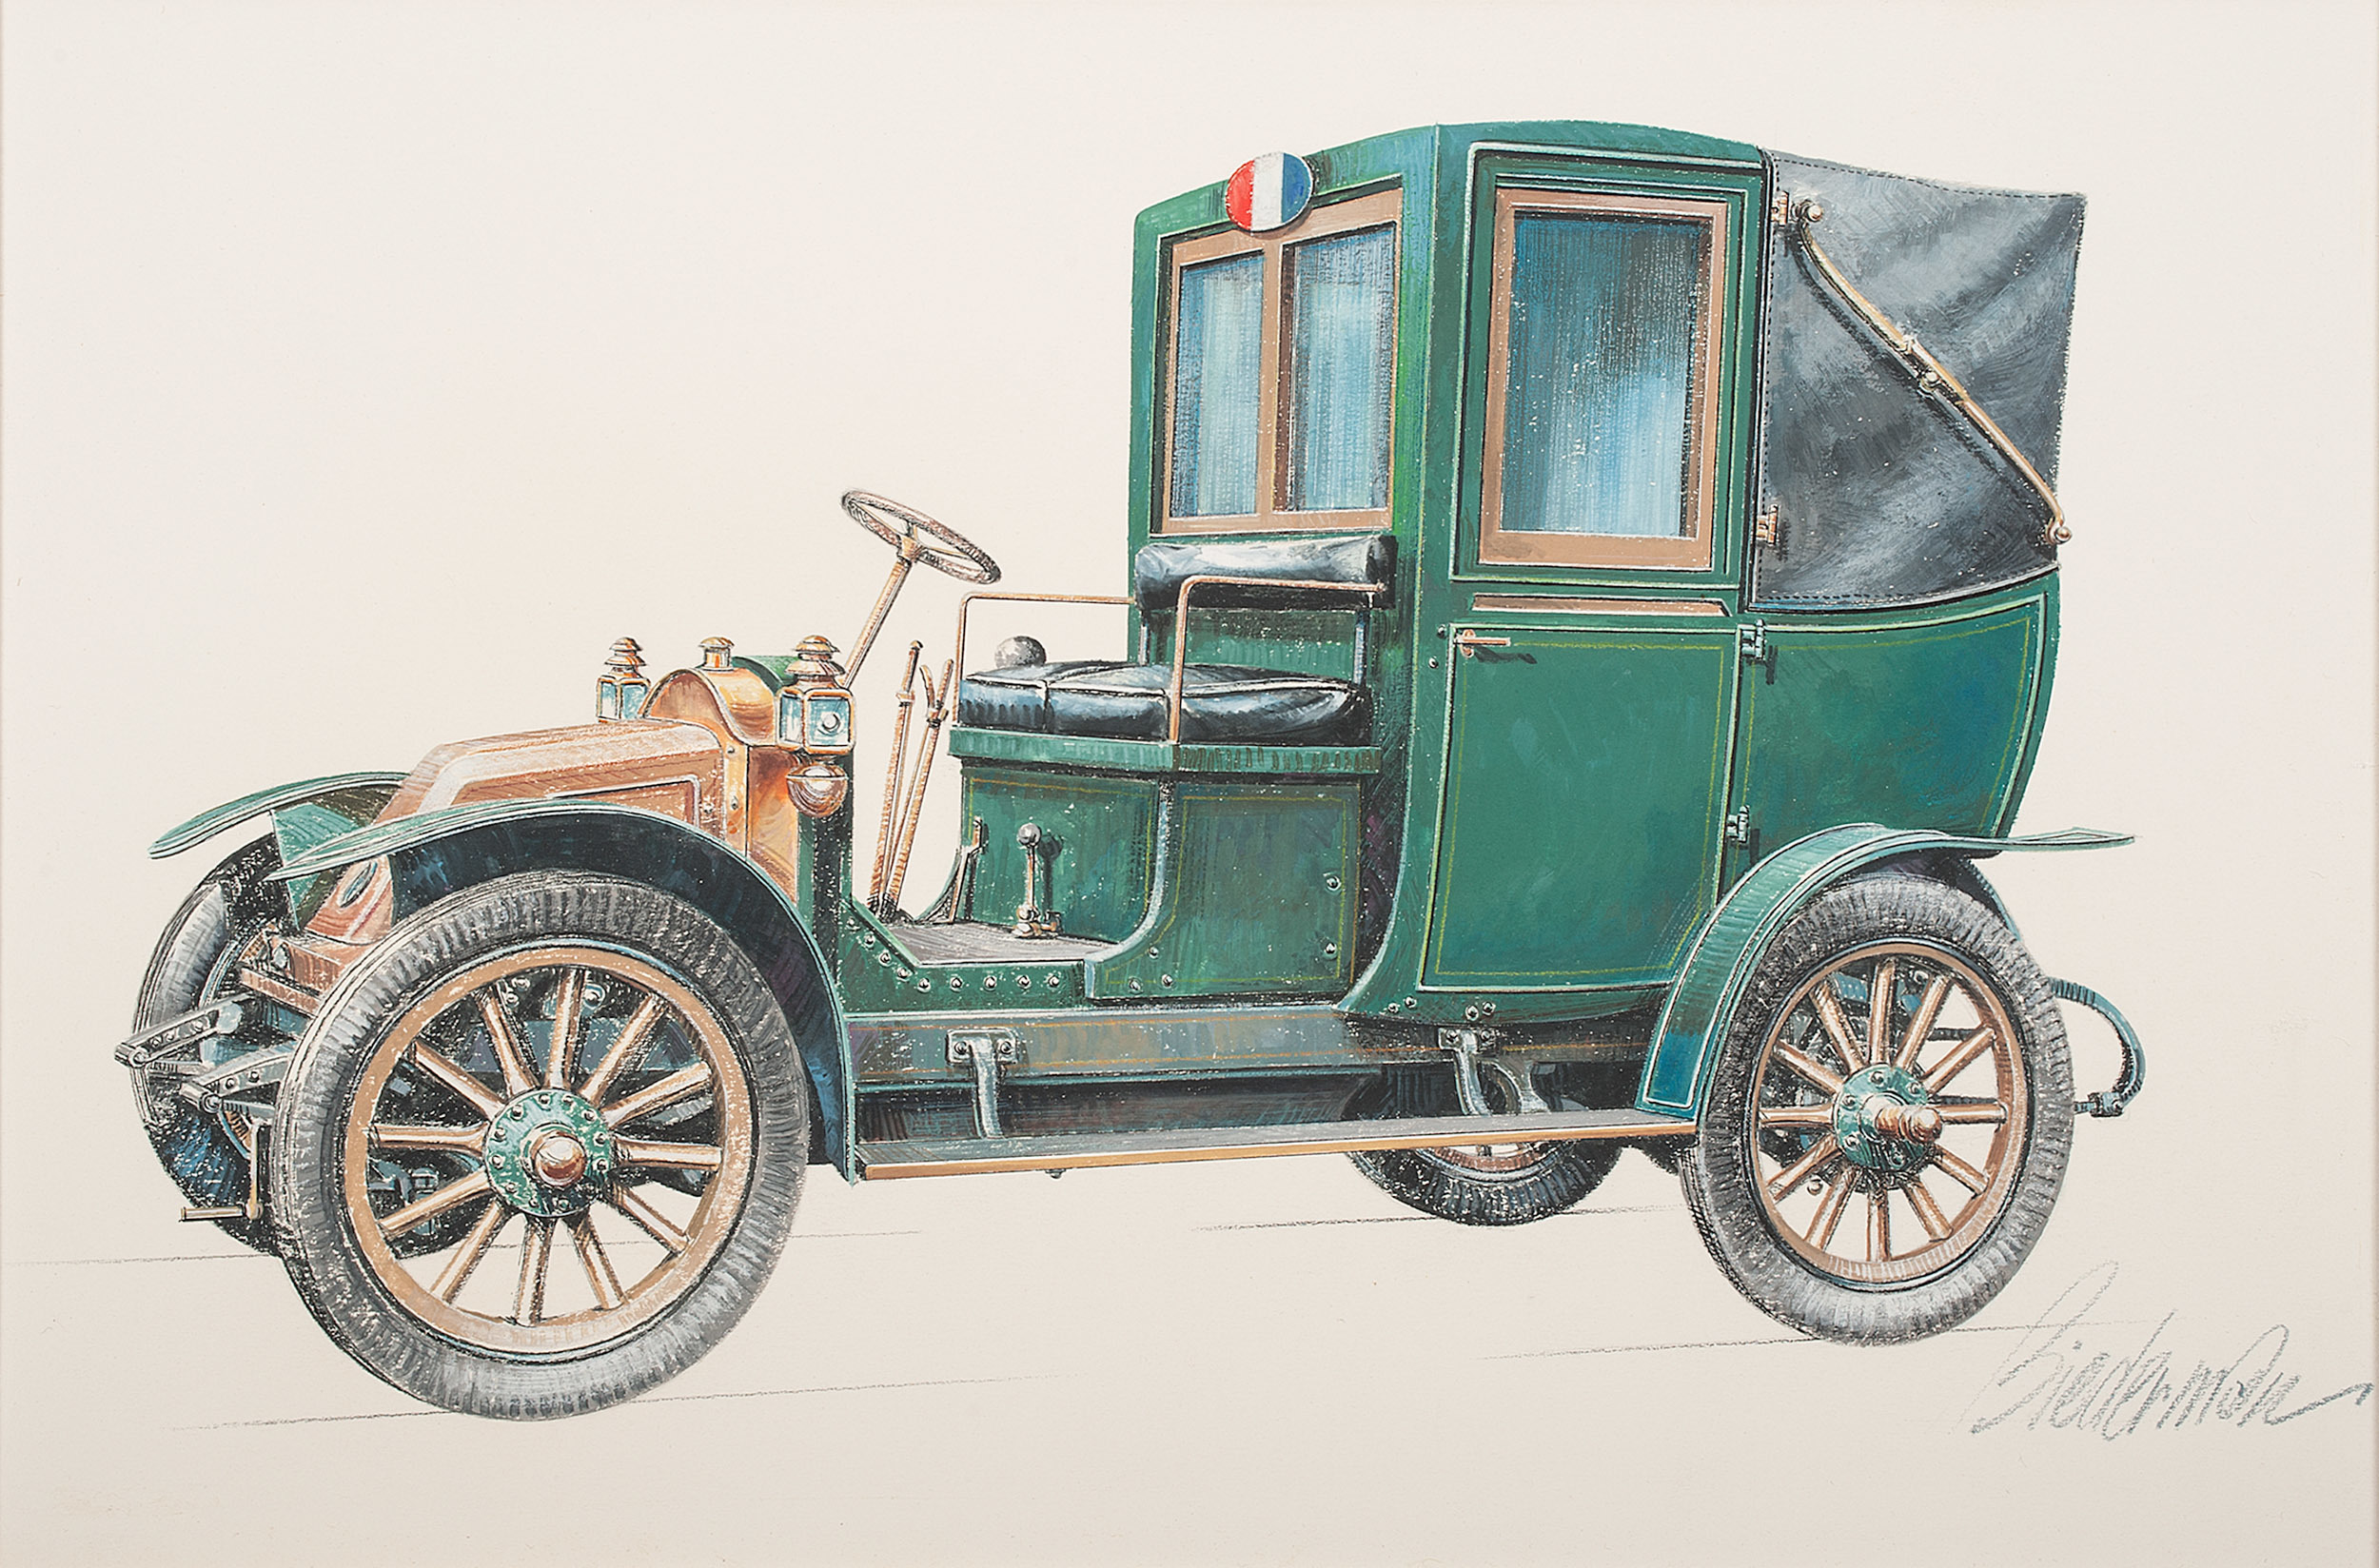 1909 Renault Paris Taxicab: Illustrated by Jerome D. Biederman